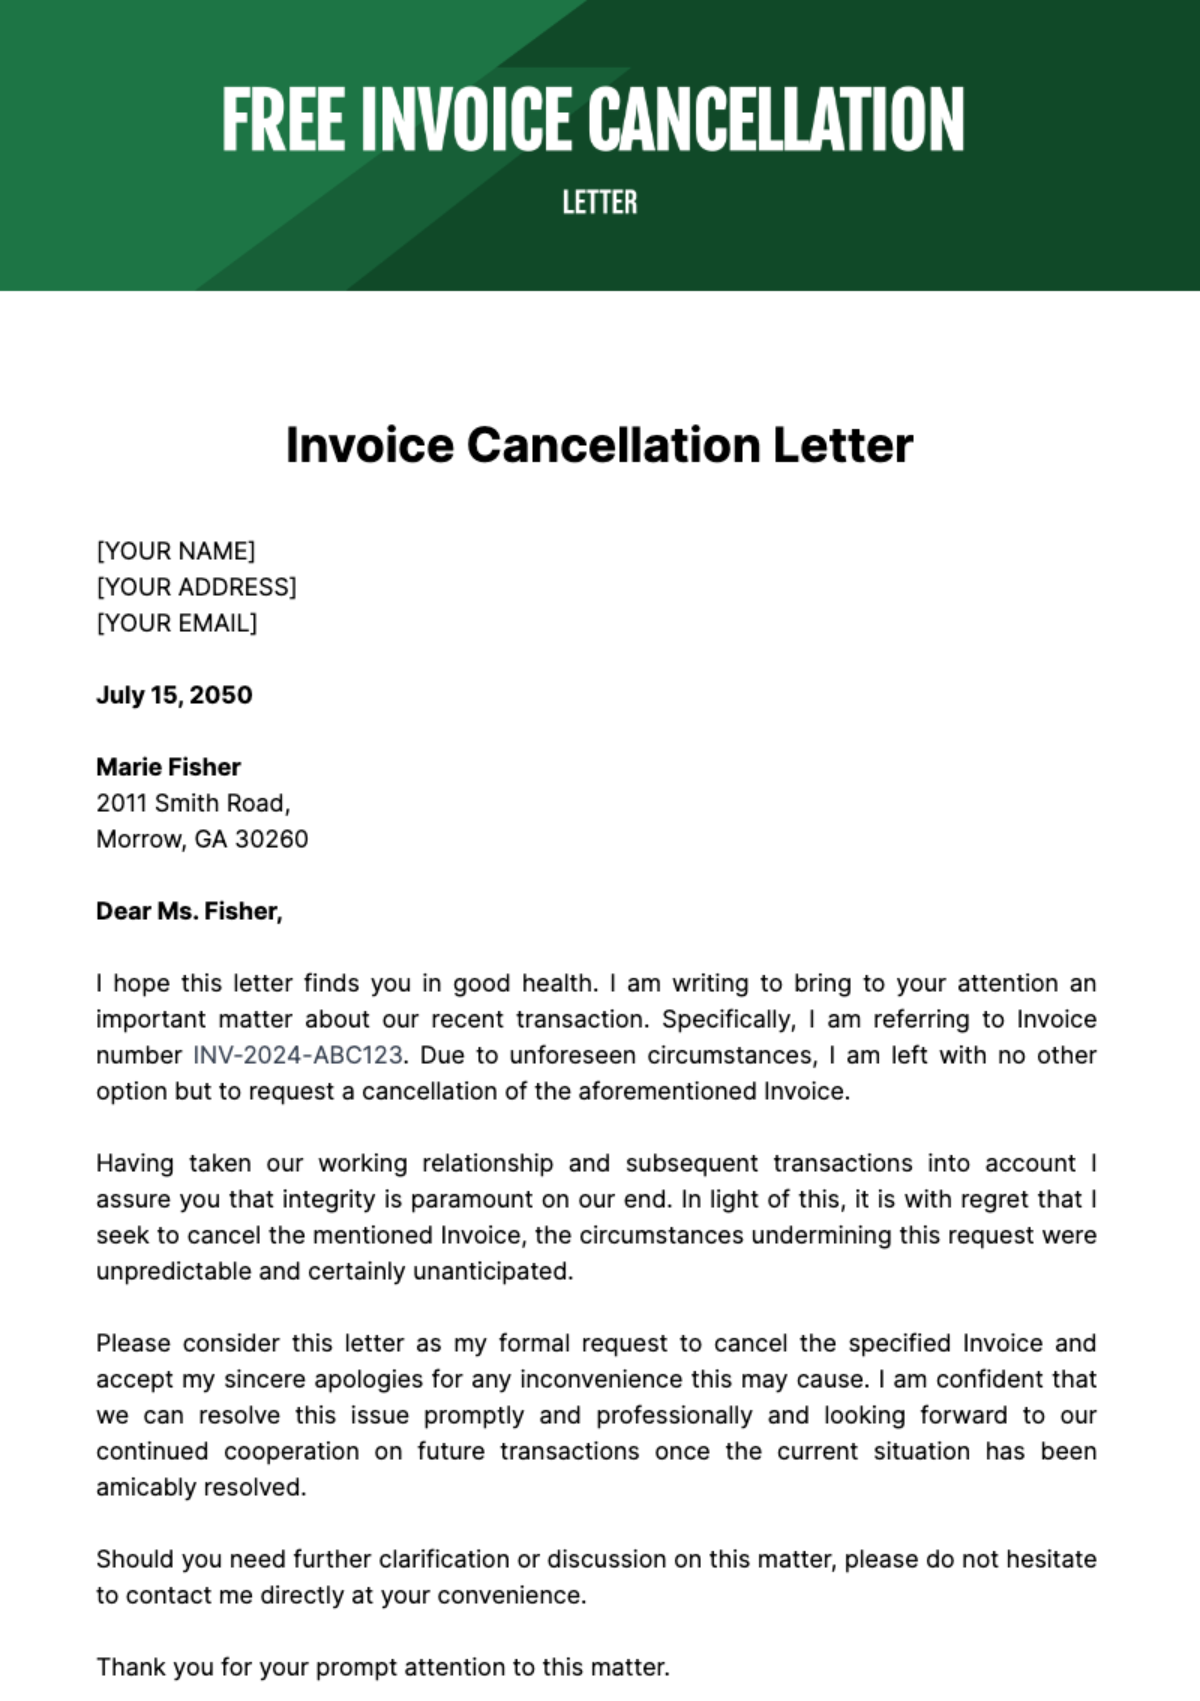 Free Invoice Cancellation Letter Template